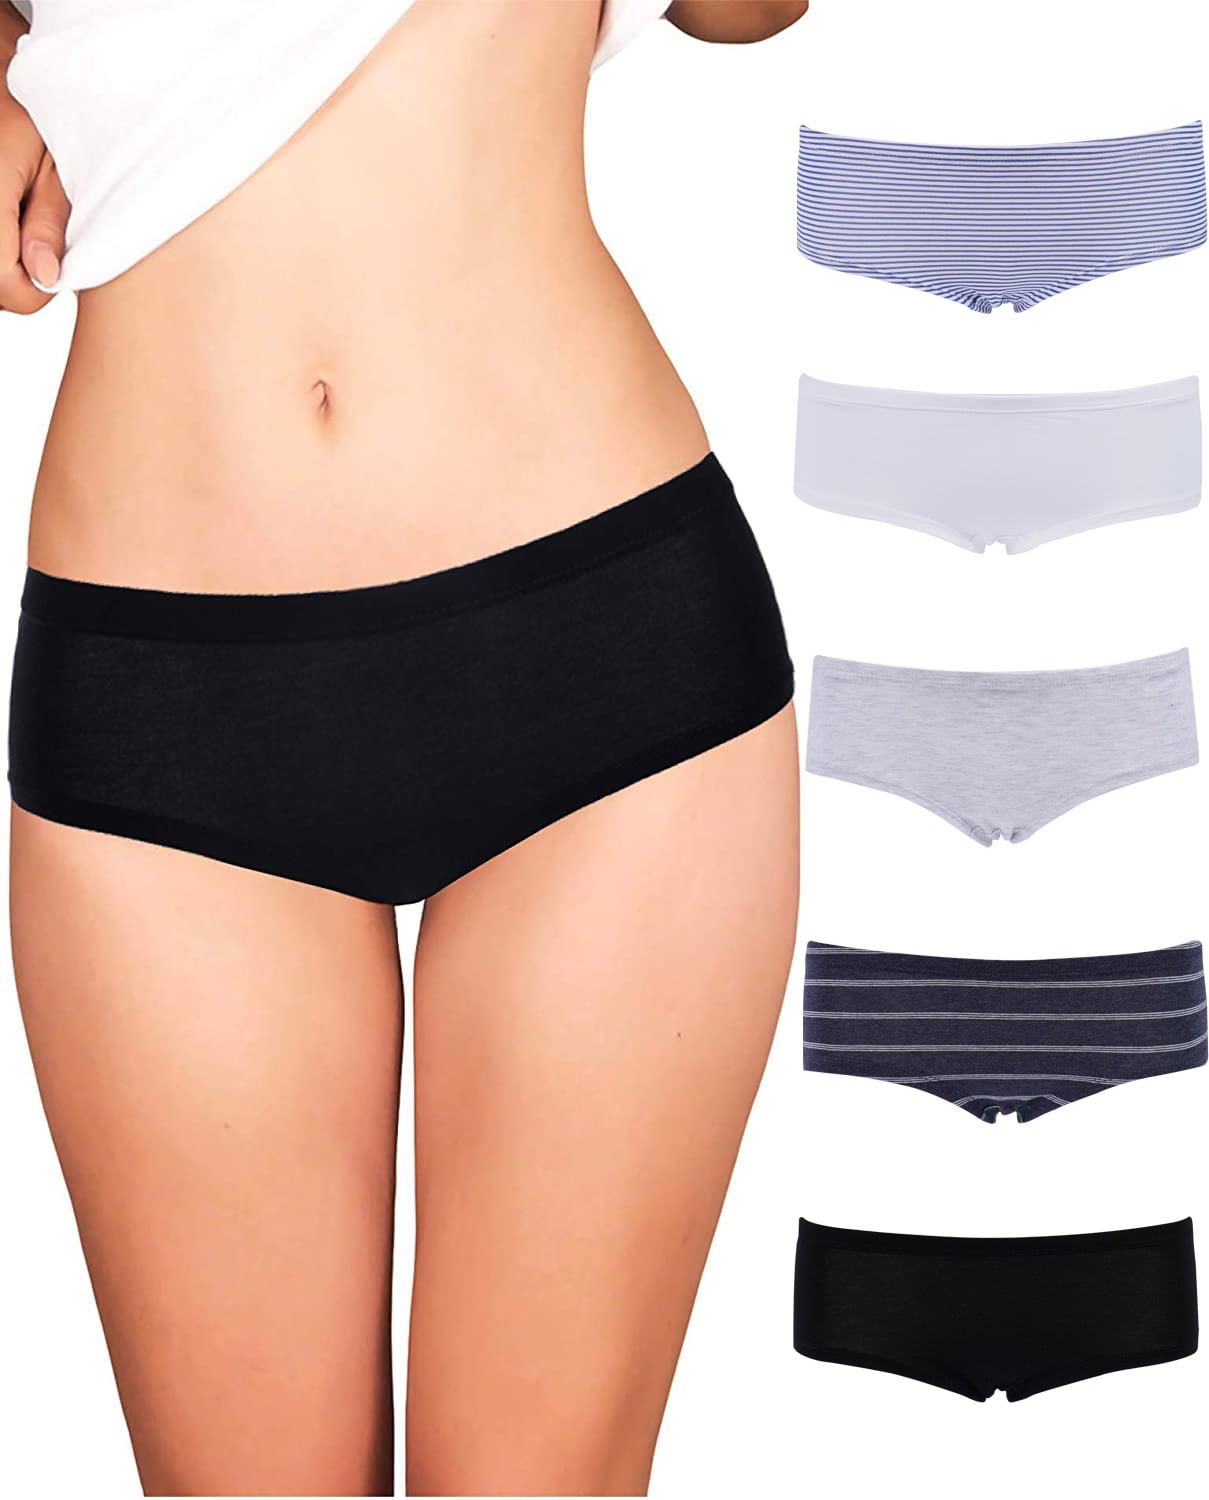 Women's Underwear Boyshort Panties for Comfort Boy Short- 5 Pack Colors and  Patterns May Vary - XL